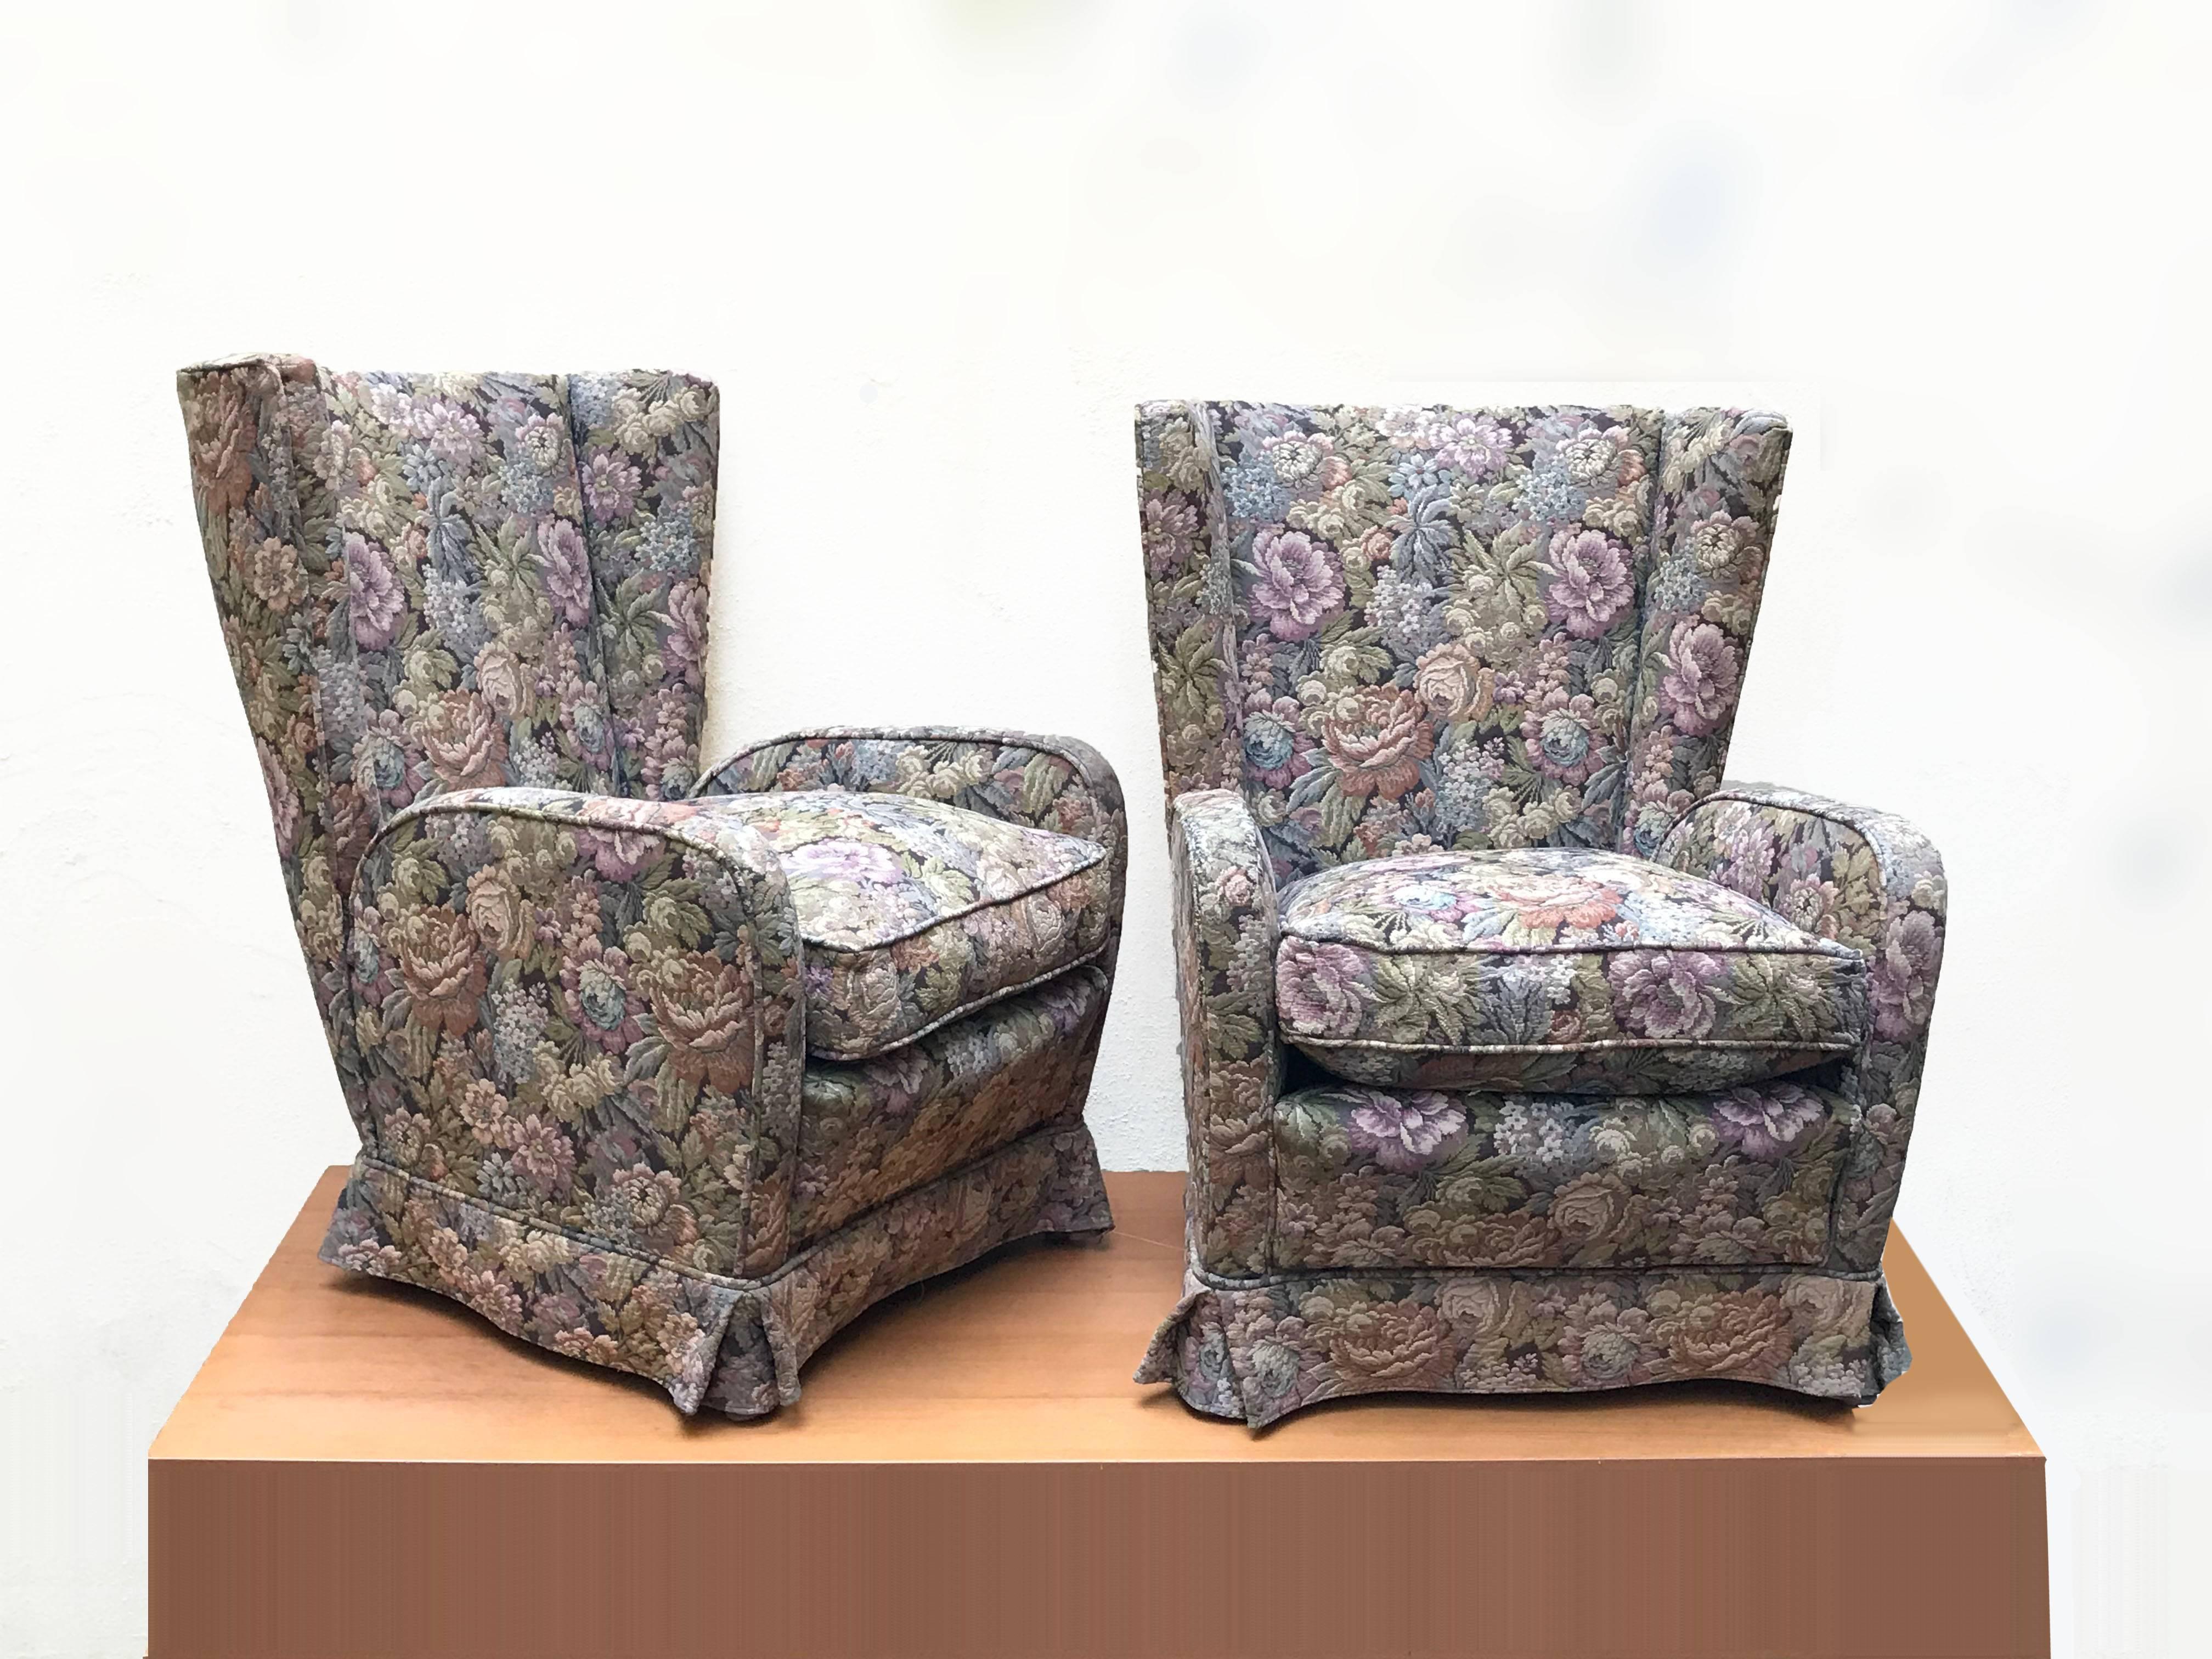 These wonderful and iconic armchairs were produced in Italy during the 1950s.

The armchairs have the original floral wool upholstery of the wooden legs.

The harmony of the lines and the elegant and midcentury color mix is breathtaking, these